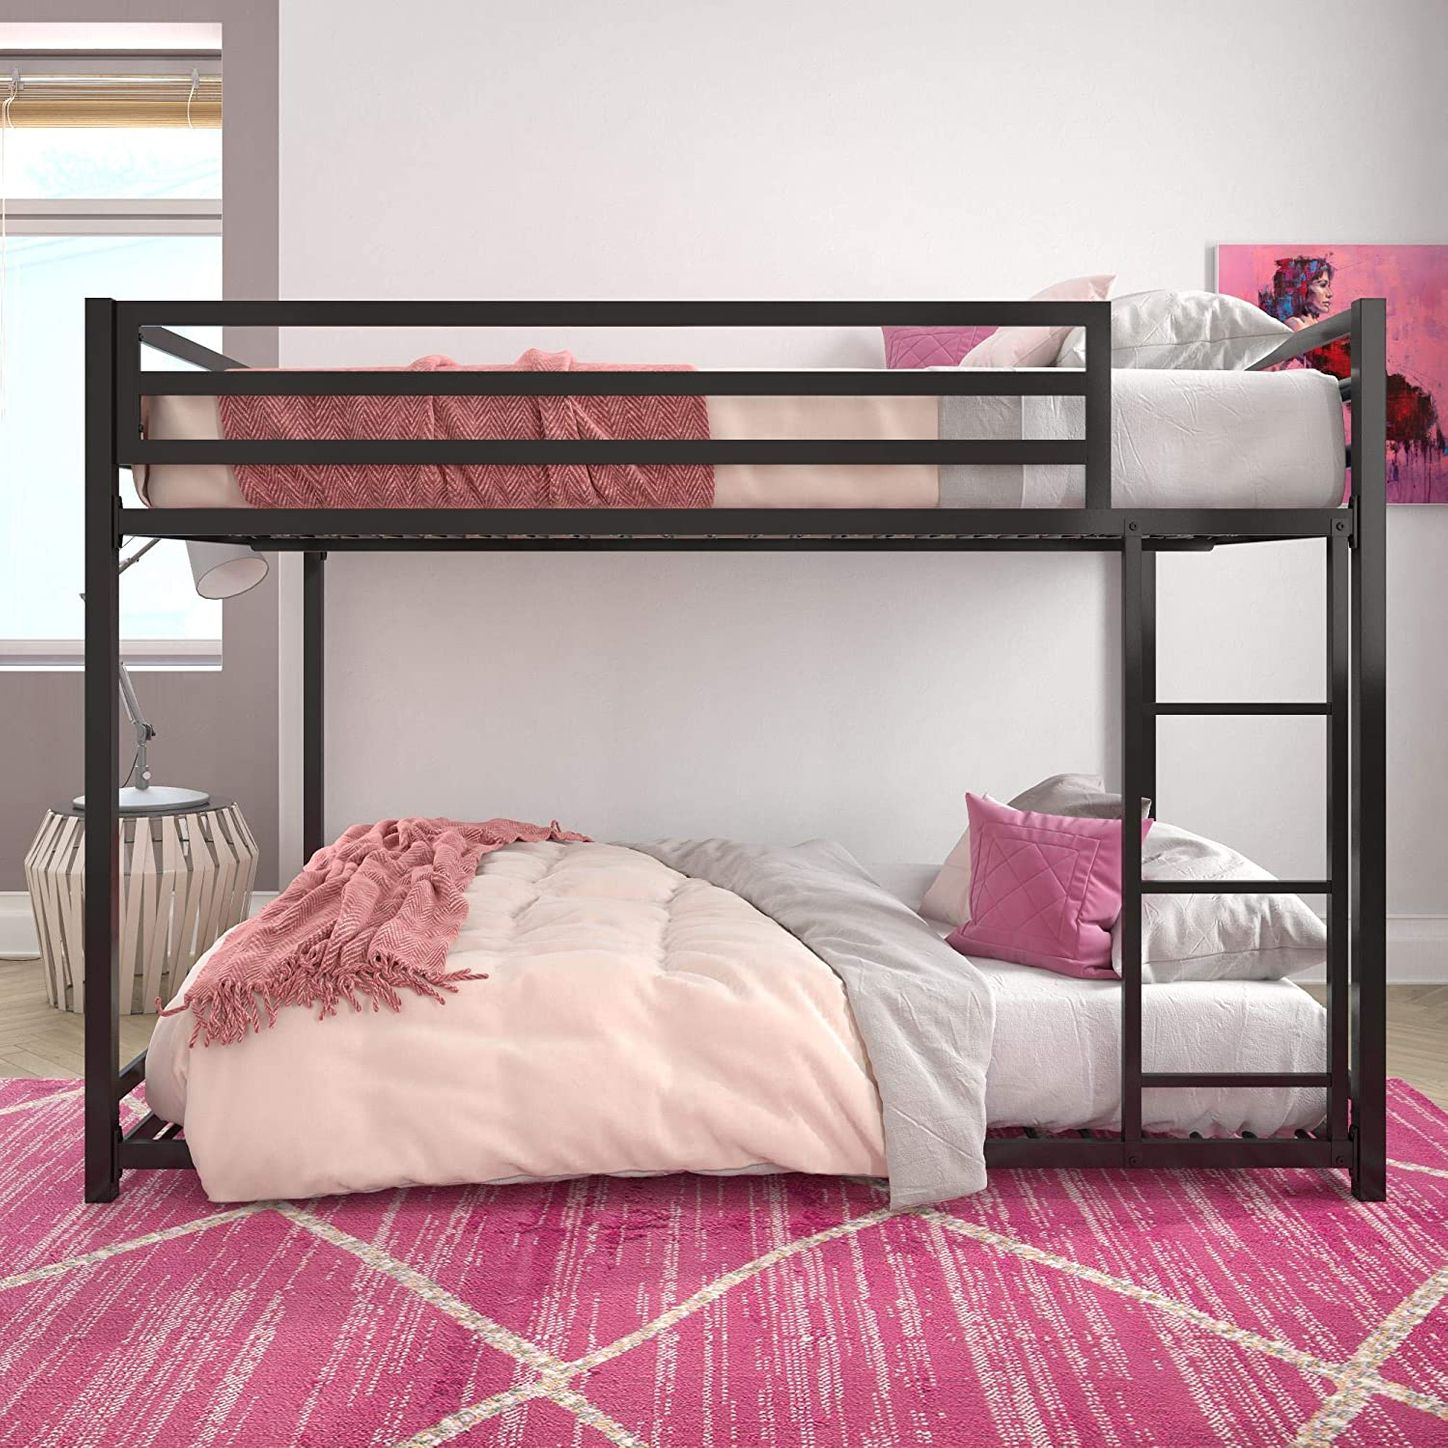 8 Best Bunk Beds 2020 The Strategist, Bunk Beds With Big Bed On Bottom